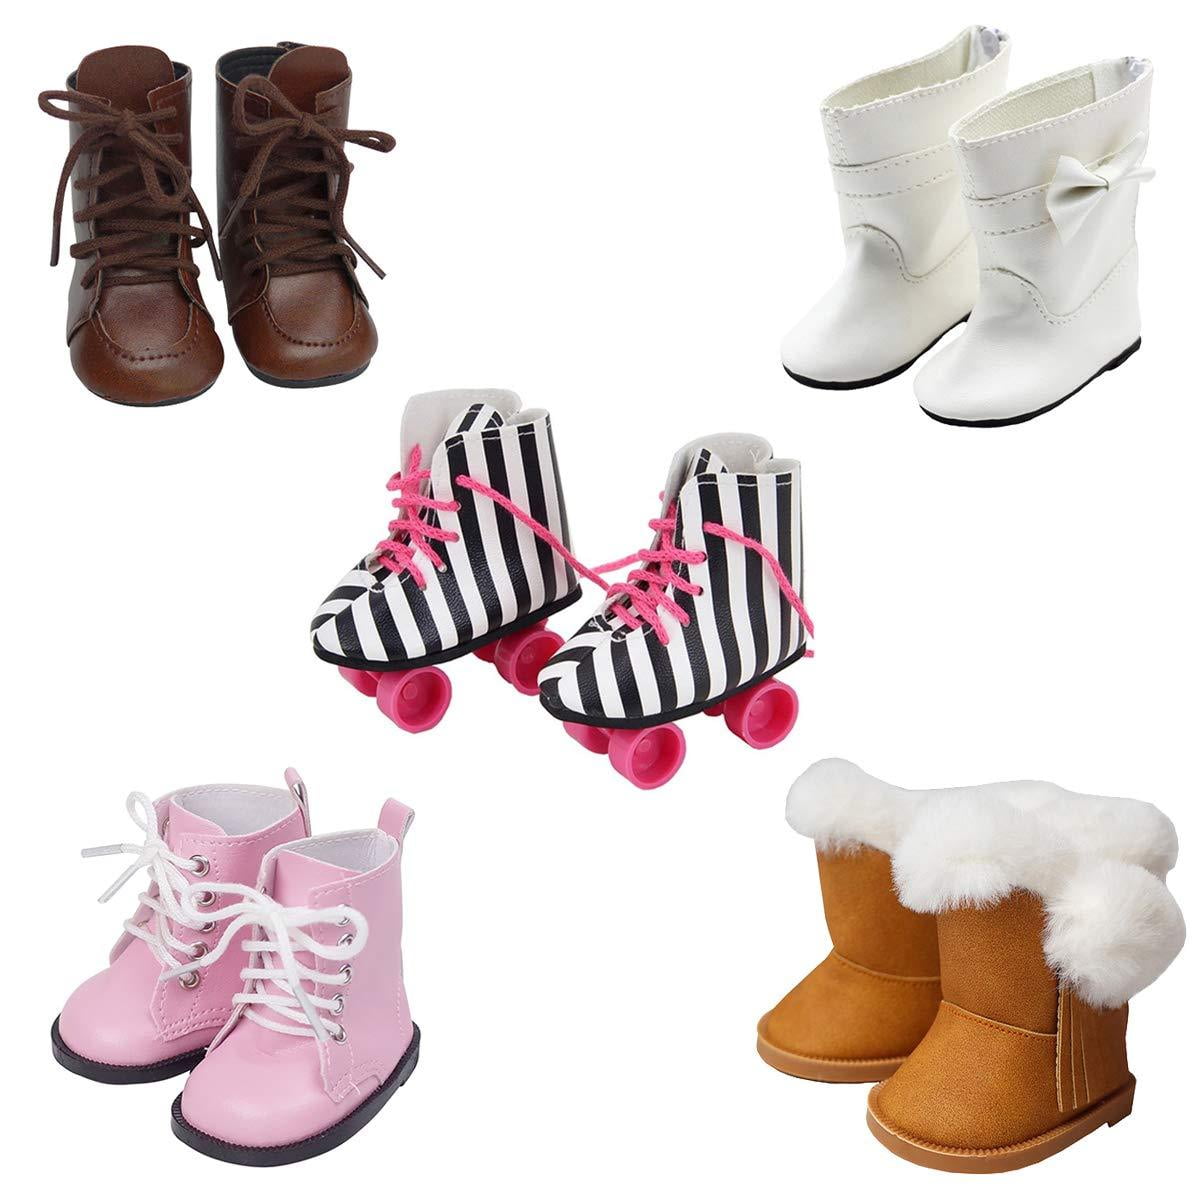 5 Pairs of Shoes + 2 Pairs of Socks Fits for 18 inch Doll Shoes American  Dolls Accessories 100% Get Panda Shoes and Boots or Skates